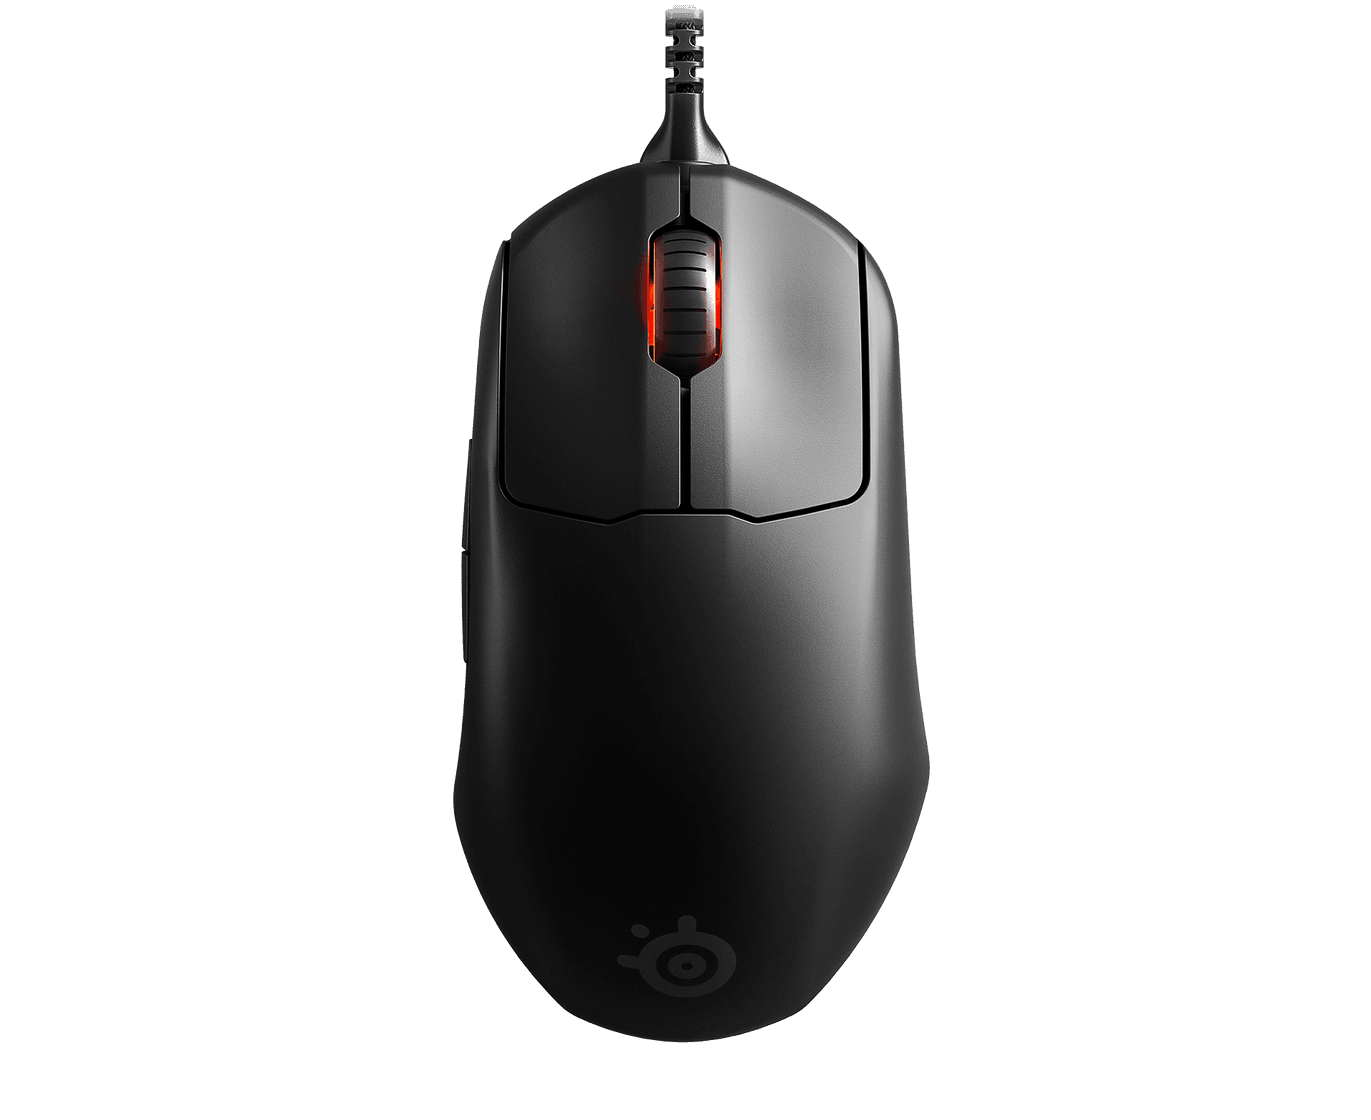 STEELSERIES PRIME+ MOUSE